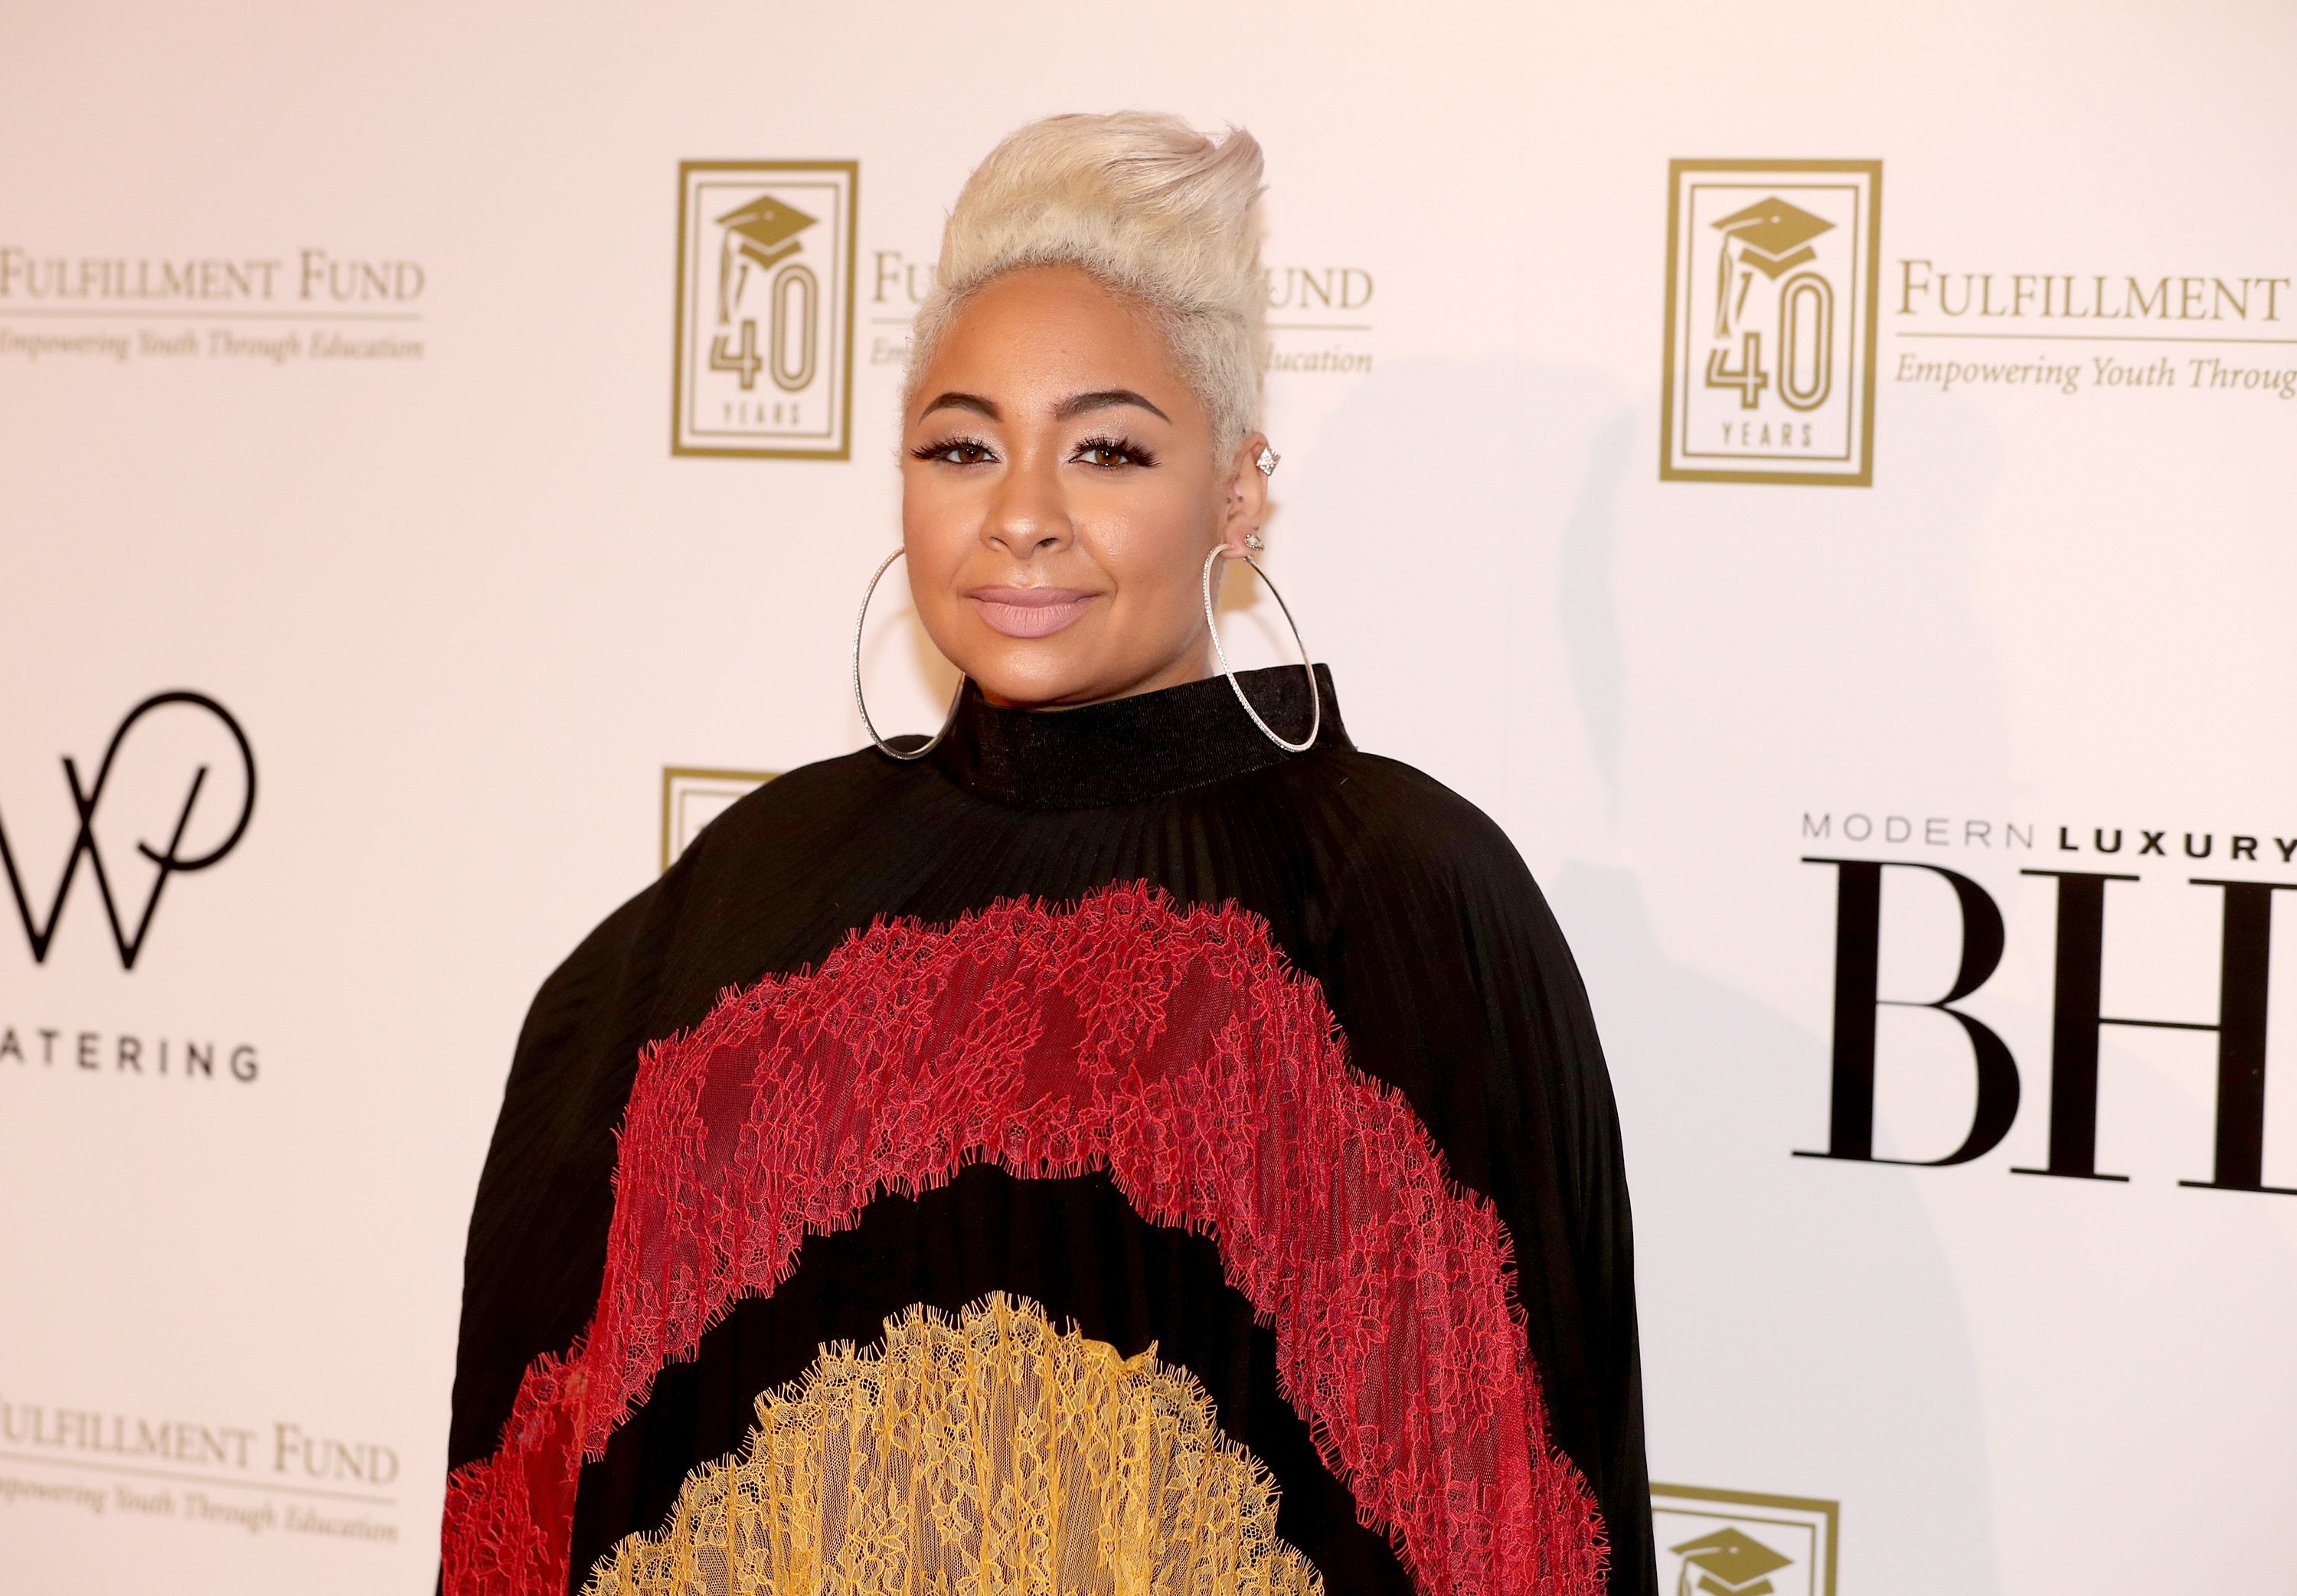 Raven-Symone at A Legacy Of Changing Lives presented by the Fulfillment Fund at The Ray Dolby Ballroom on March 13, 2018. | Photo: Getty Images